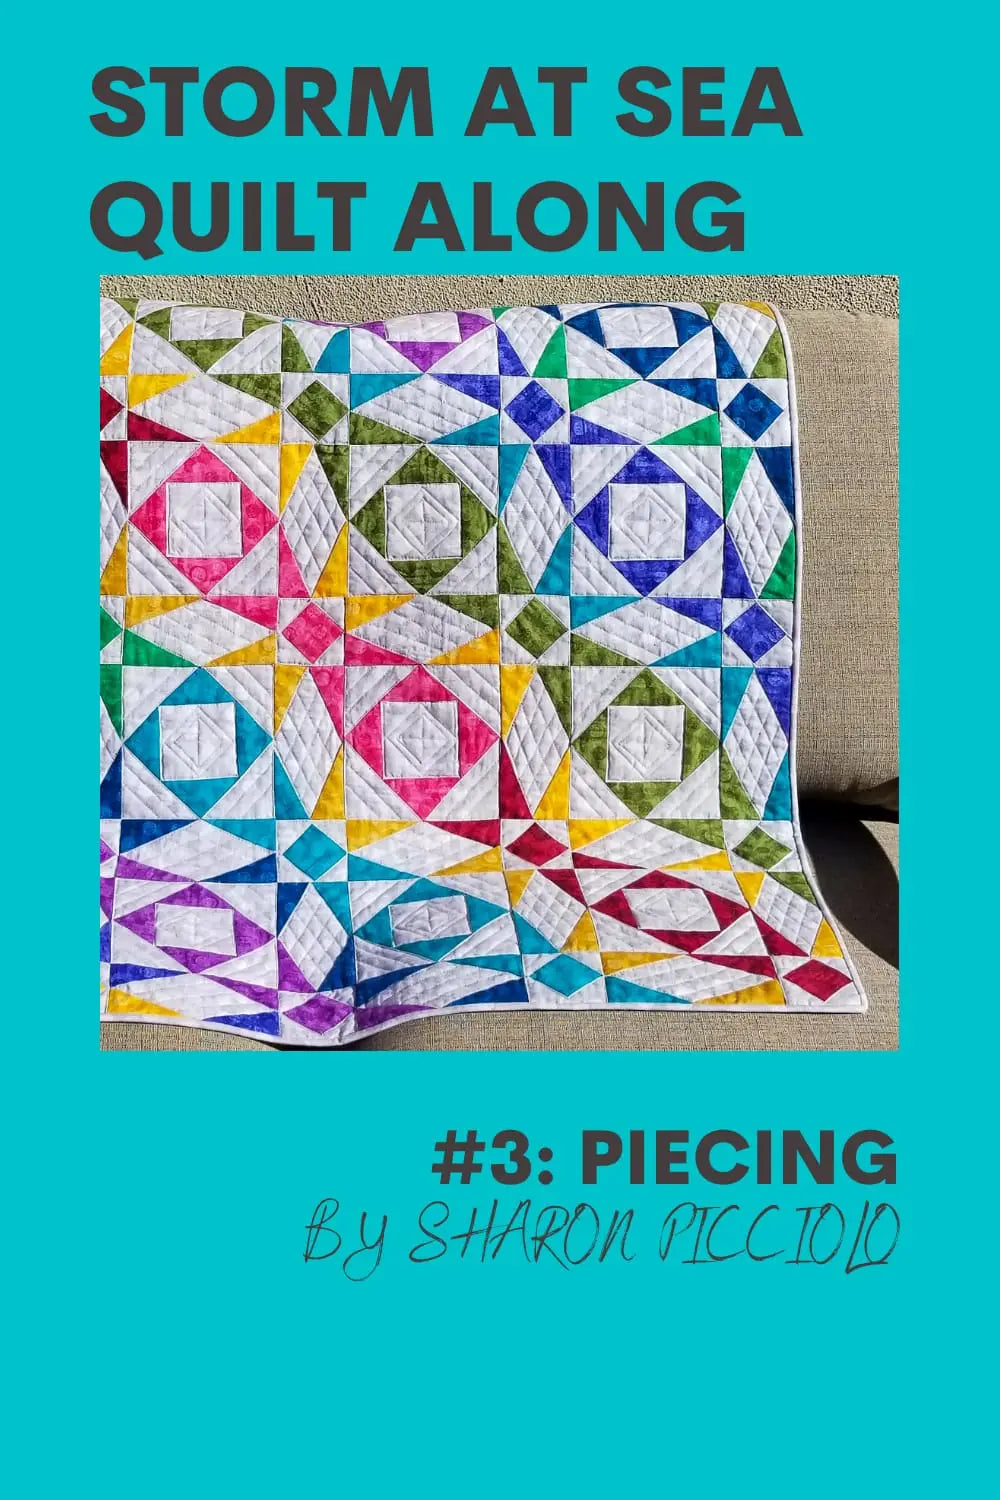 Storm at Sea Quilt Along #3: Piecing your quilt top